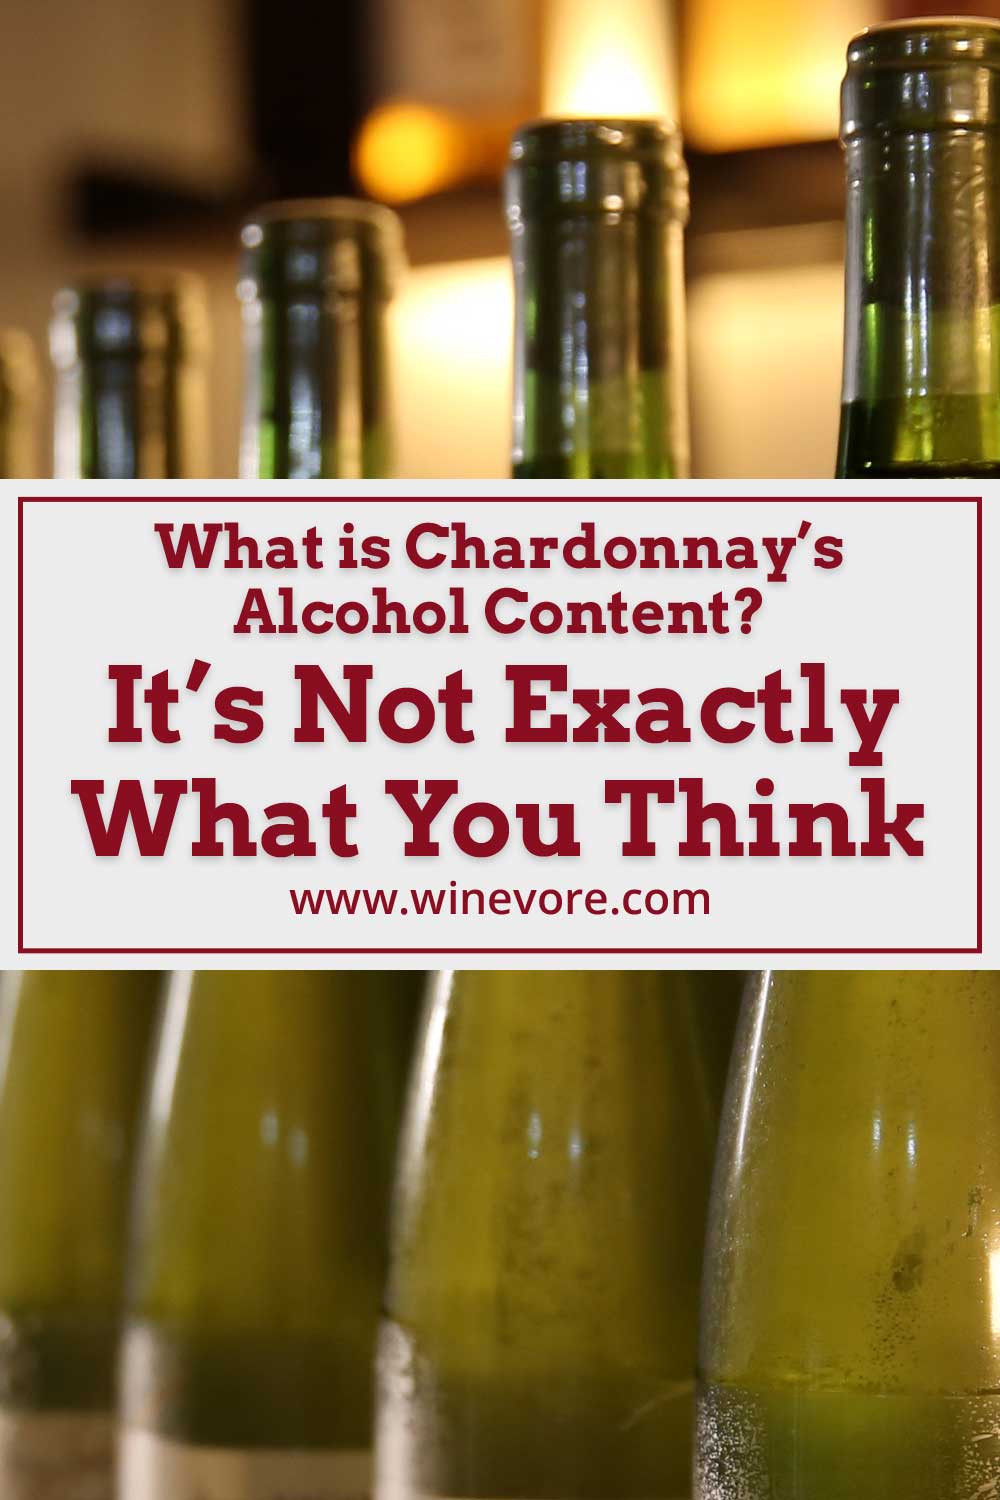 Wine bottles lined up - Chardonnay's Alcohol Content.